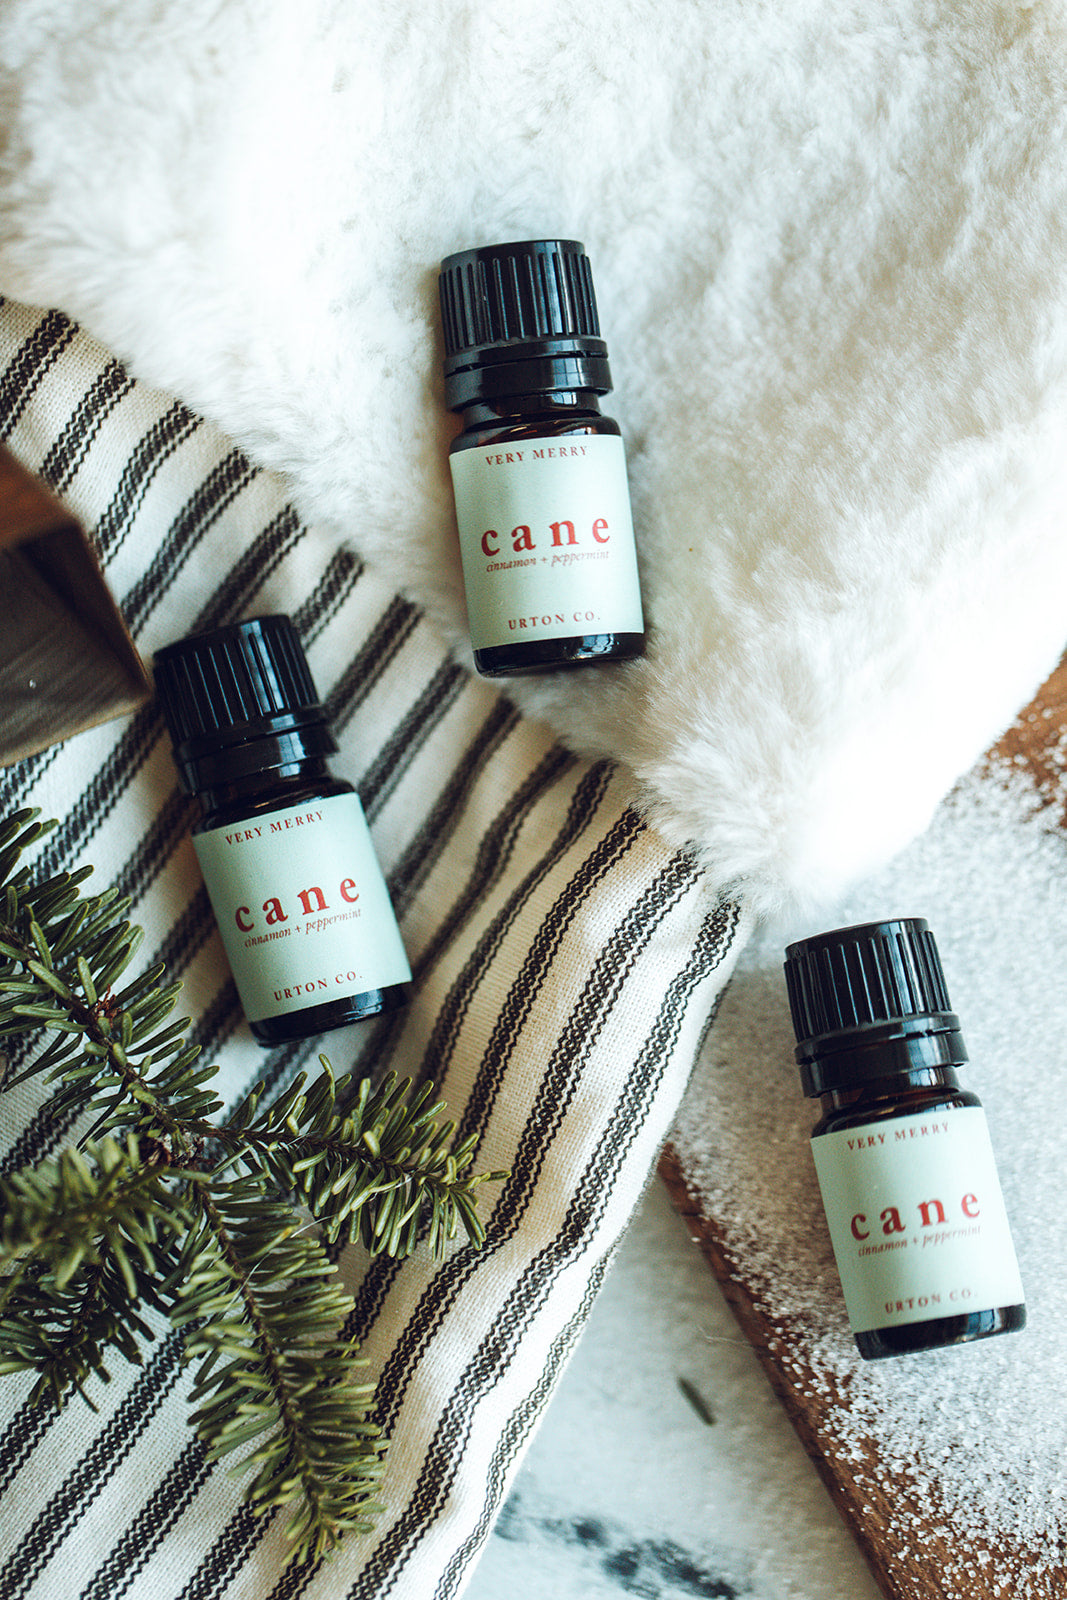 Candy Cane Essential Oil Blend - Cinnamon + Peppermint Aromatherapy